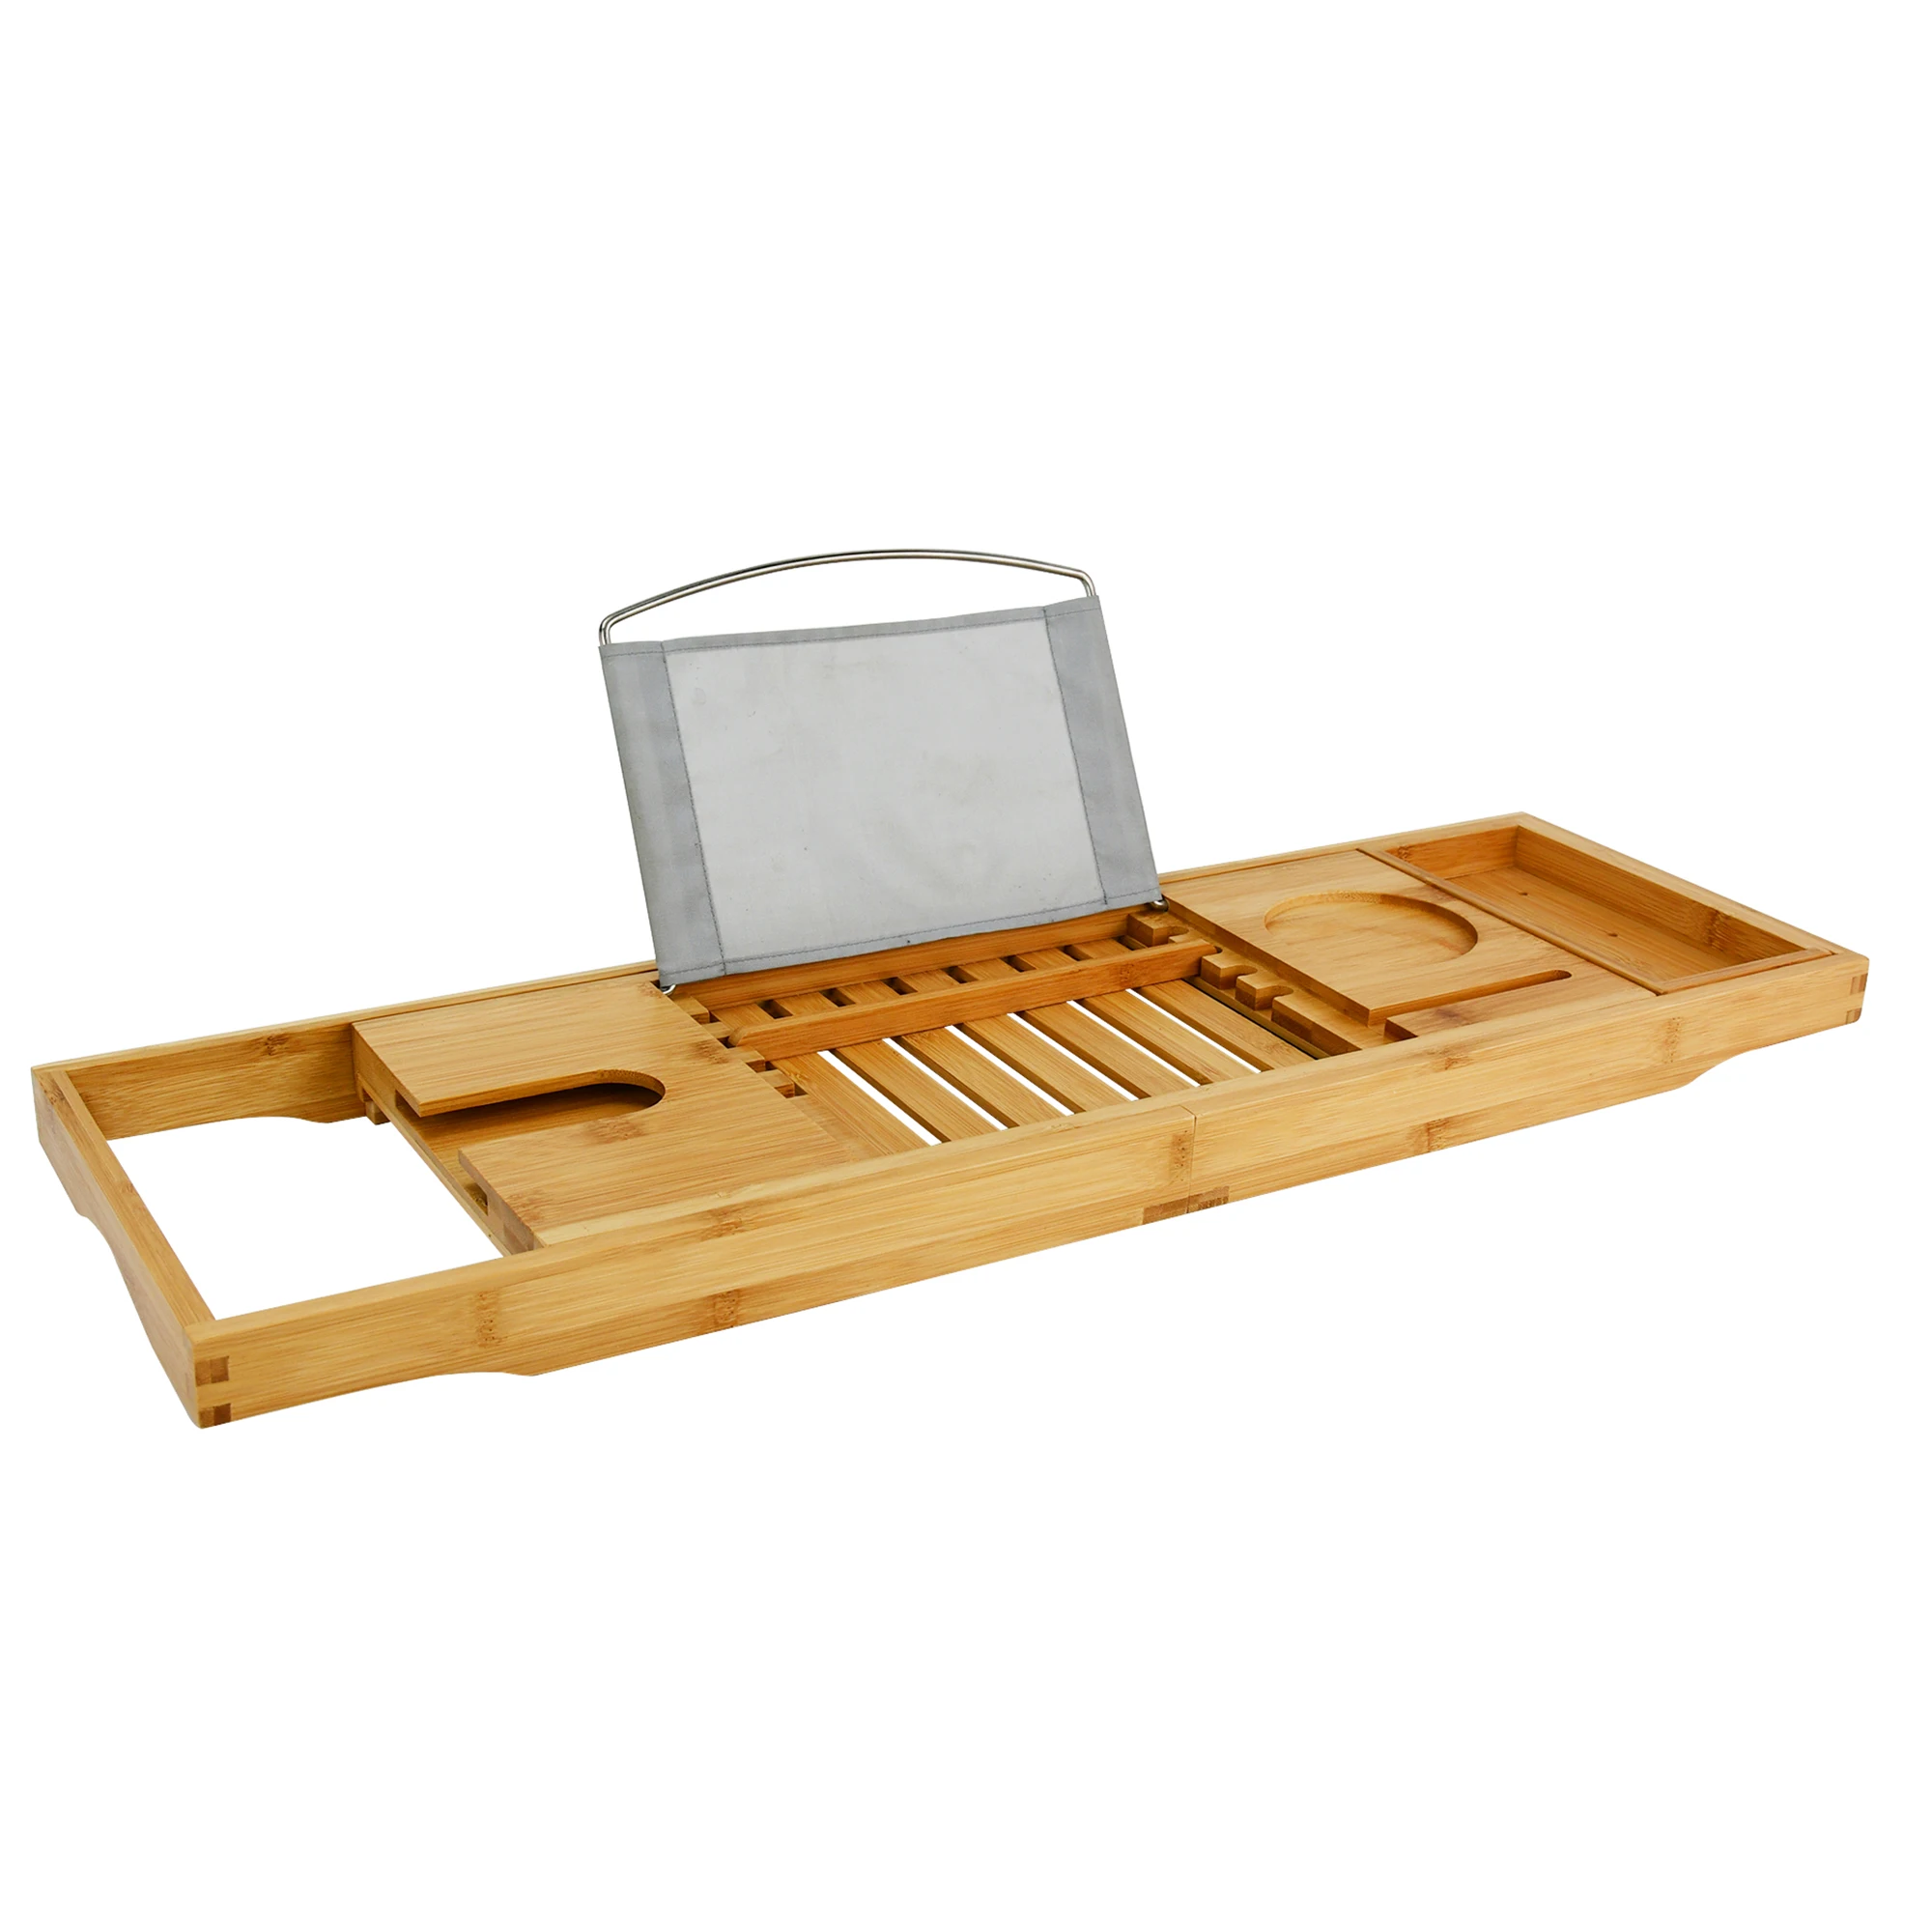 Luxury Natural Wood Bamboo Bath Tray for Book Wine Holder Ideal Gift For Loved Ones Bathtub Bathroom Counter Tray